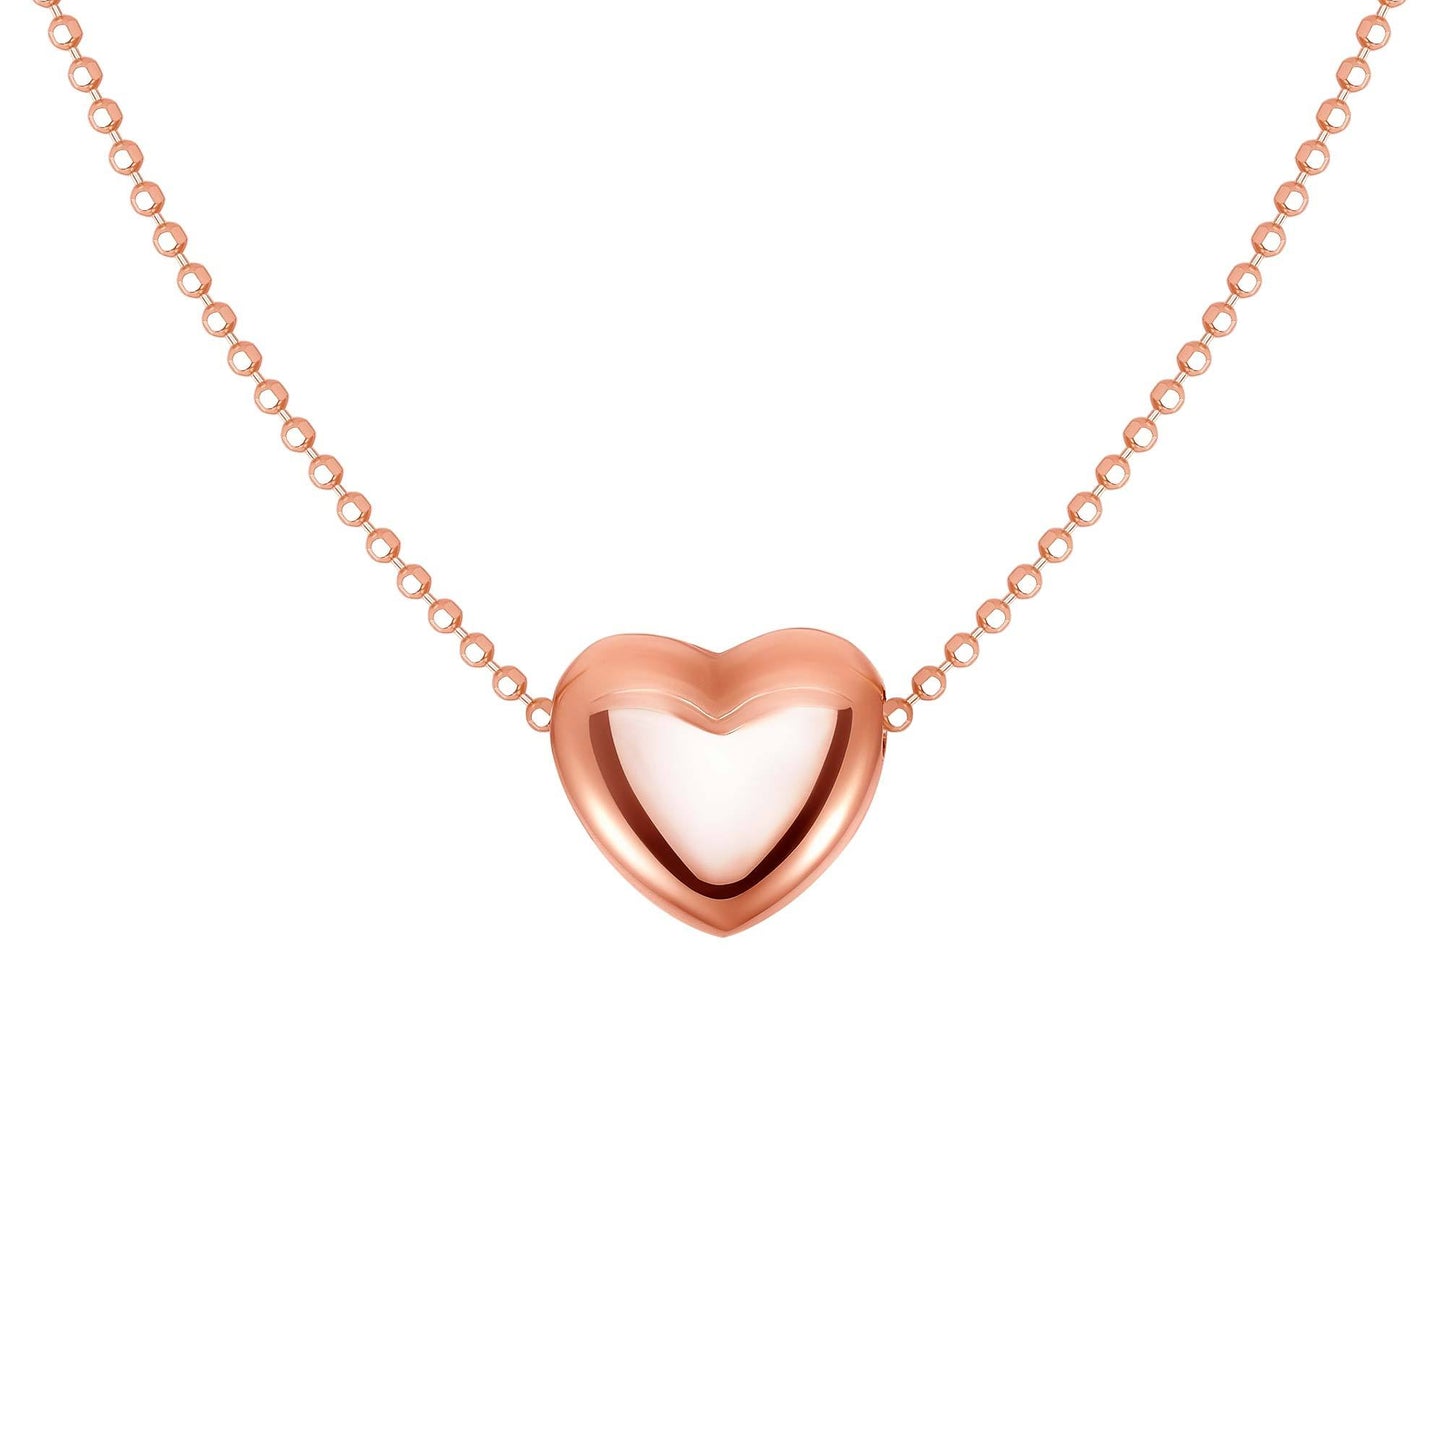 Silver 925 Rose Gold Plated Floating Heart Necklace. ITNK1052-RG